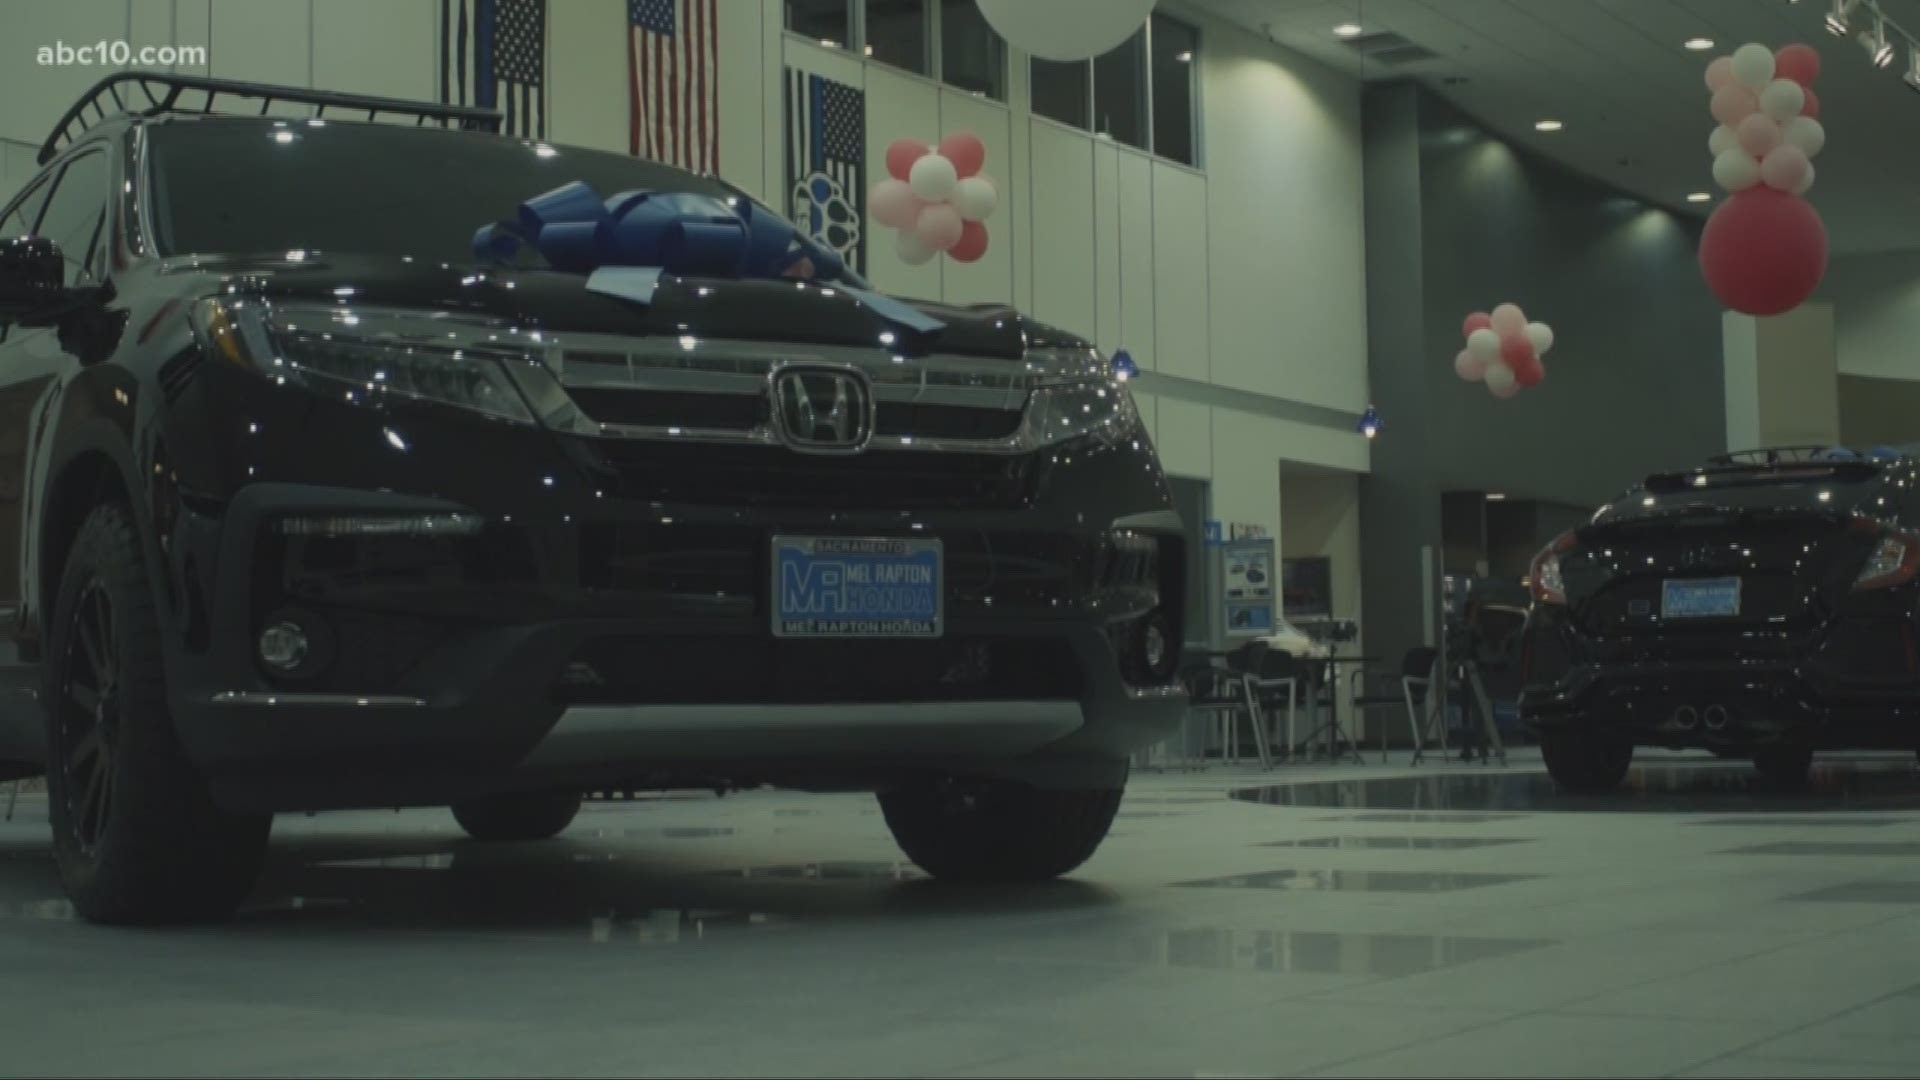 Mel Rapton Honda is finding a special way to honor fallen officers.